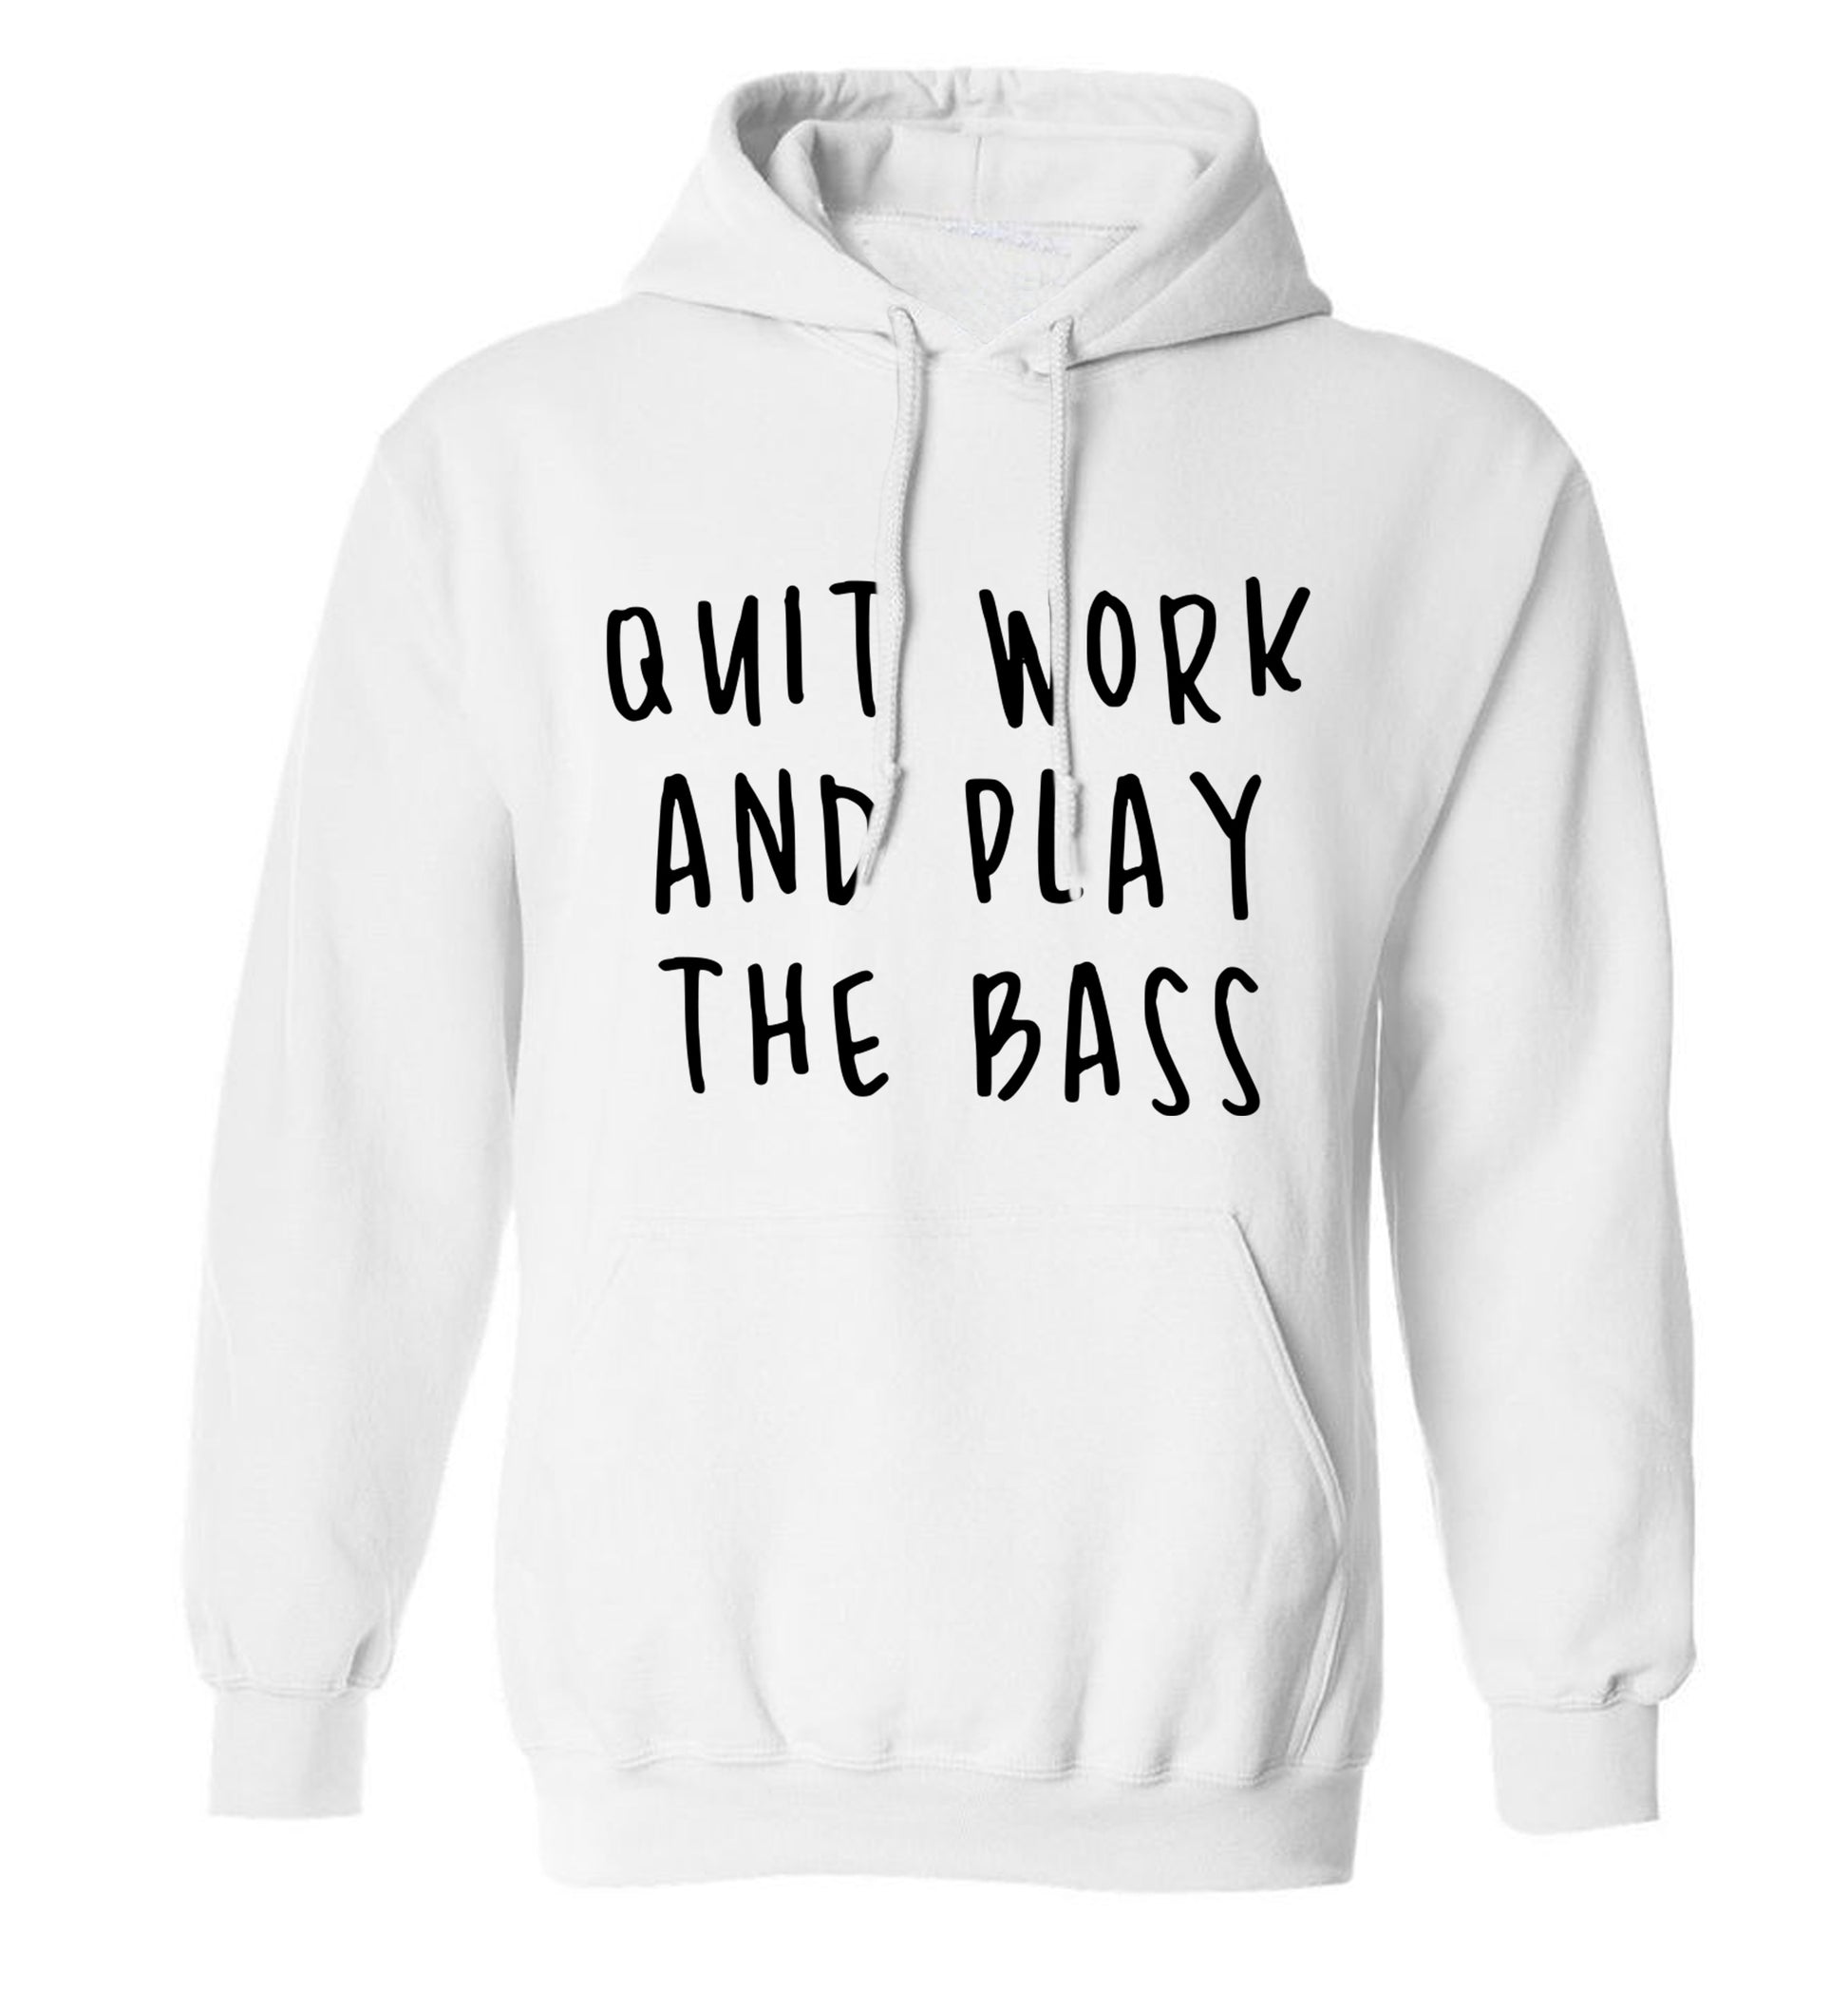 Quit work and play the bass adults unisex white hoodie 2XL